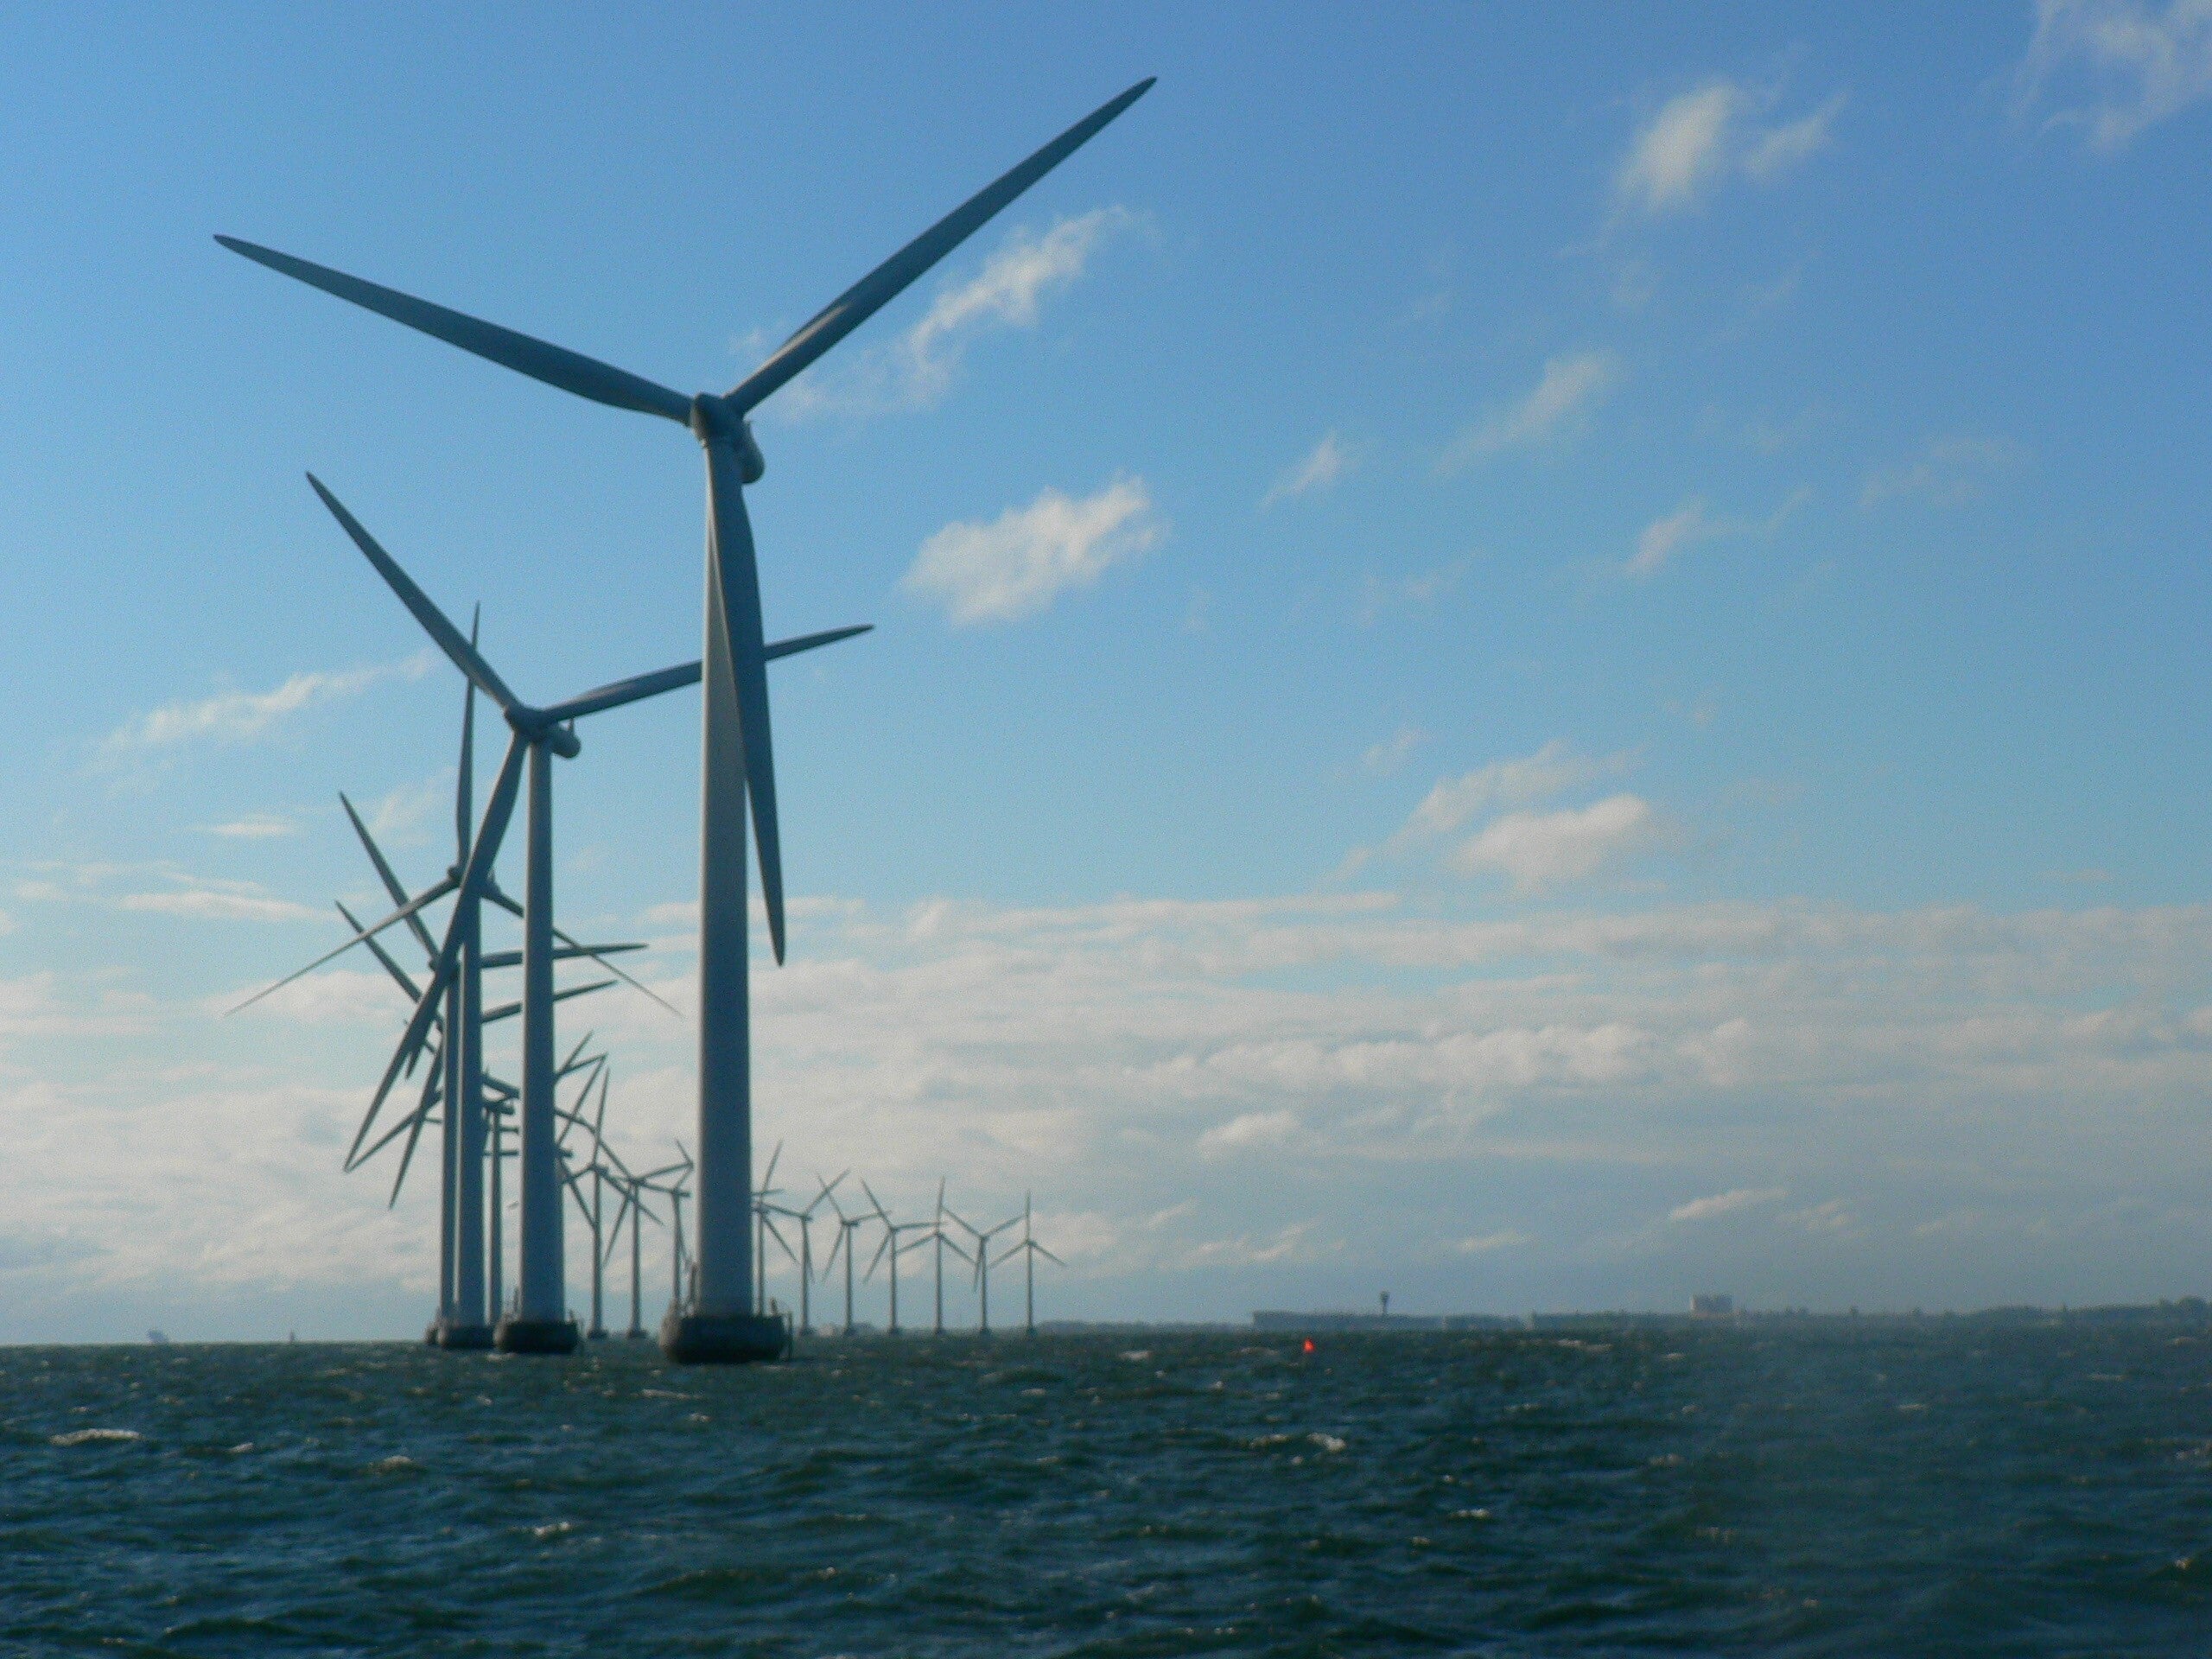 Delaware weighs procuring offshore wind power - WHYY